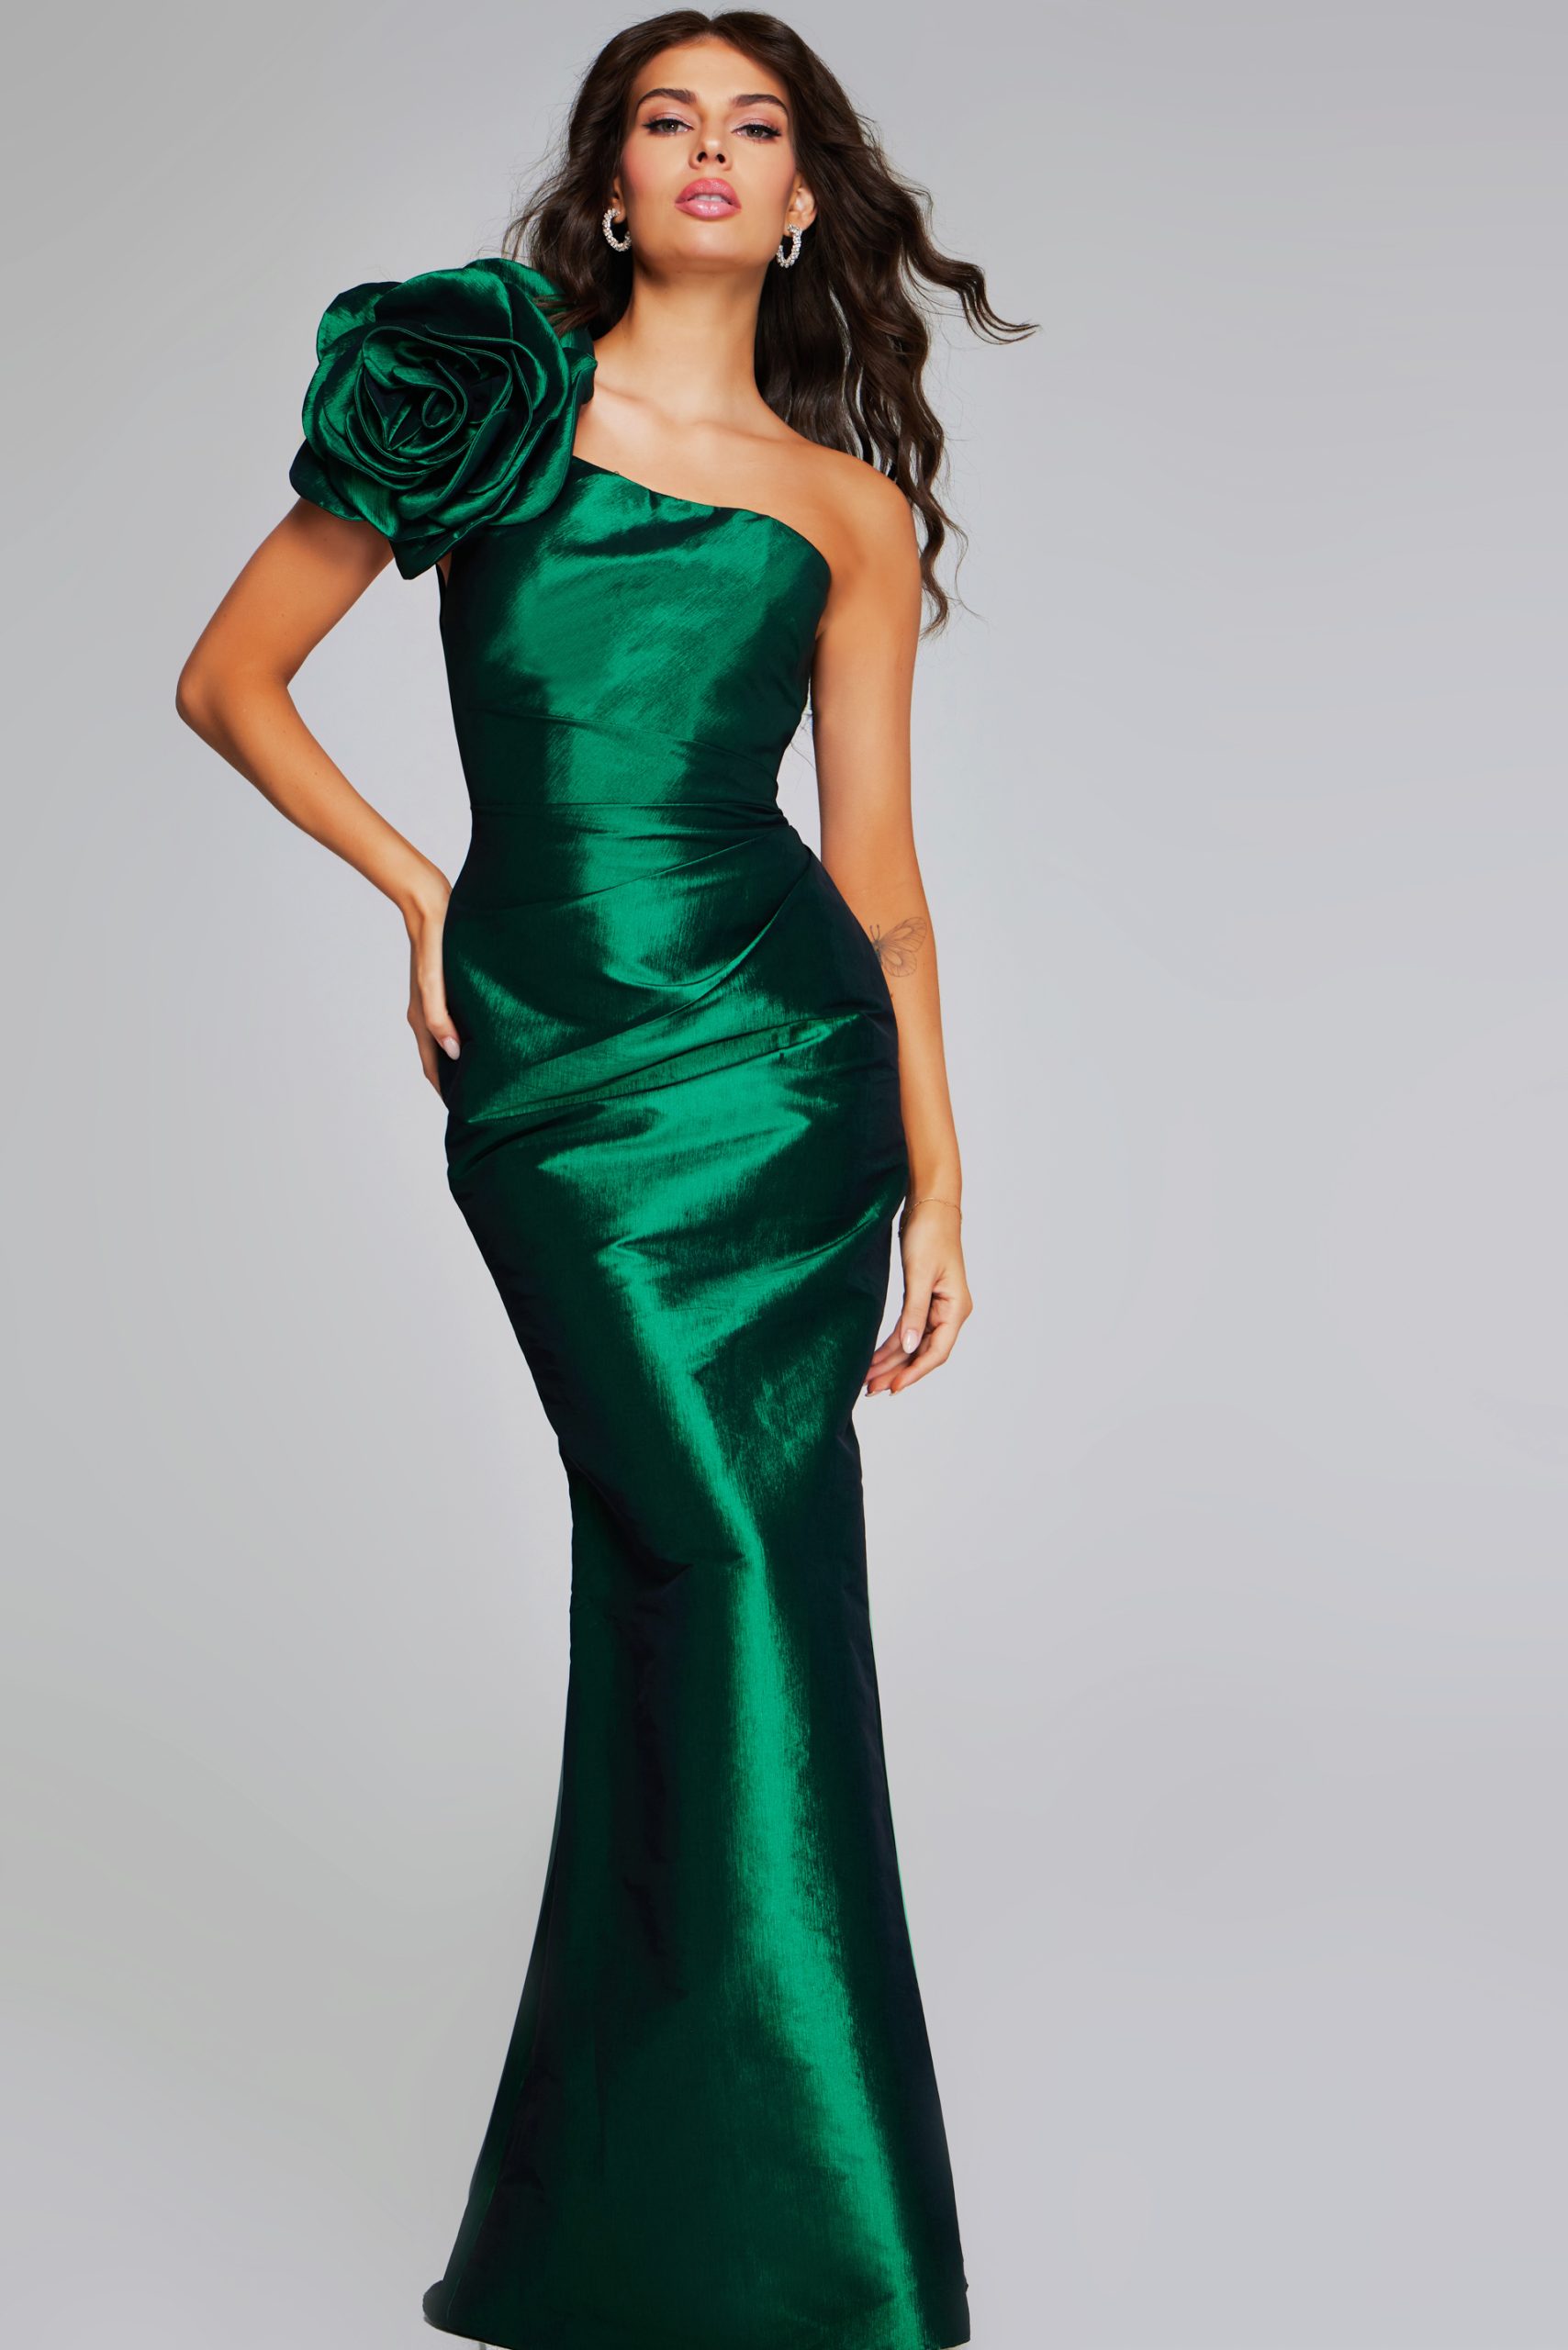 Green One-Shoulder Gown with Large Floral Accent 40206